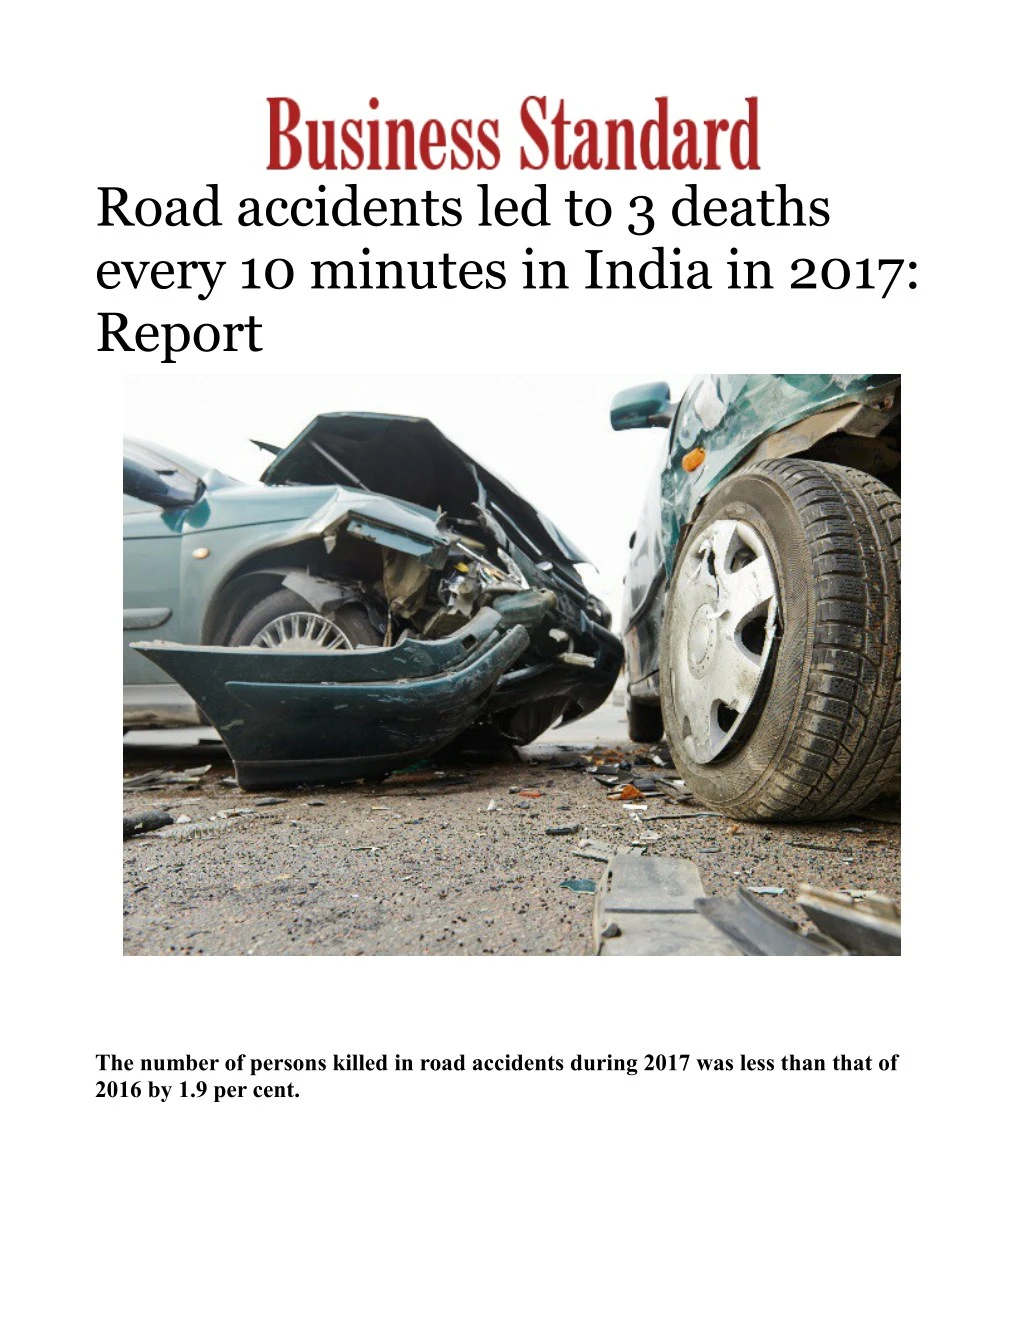 road accidents led to 3 deaths every 10 minutes